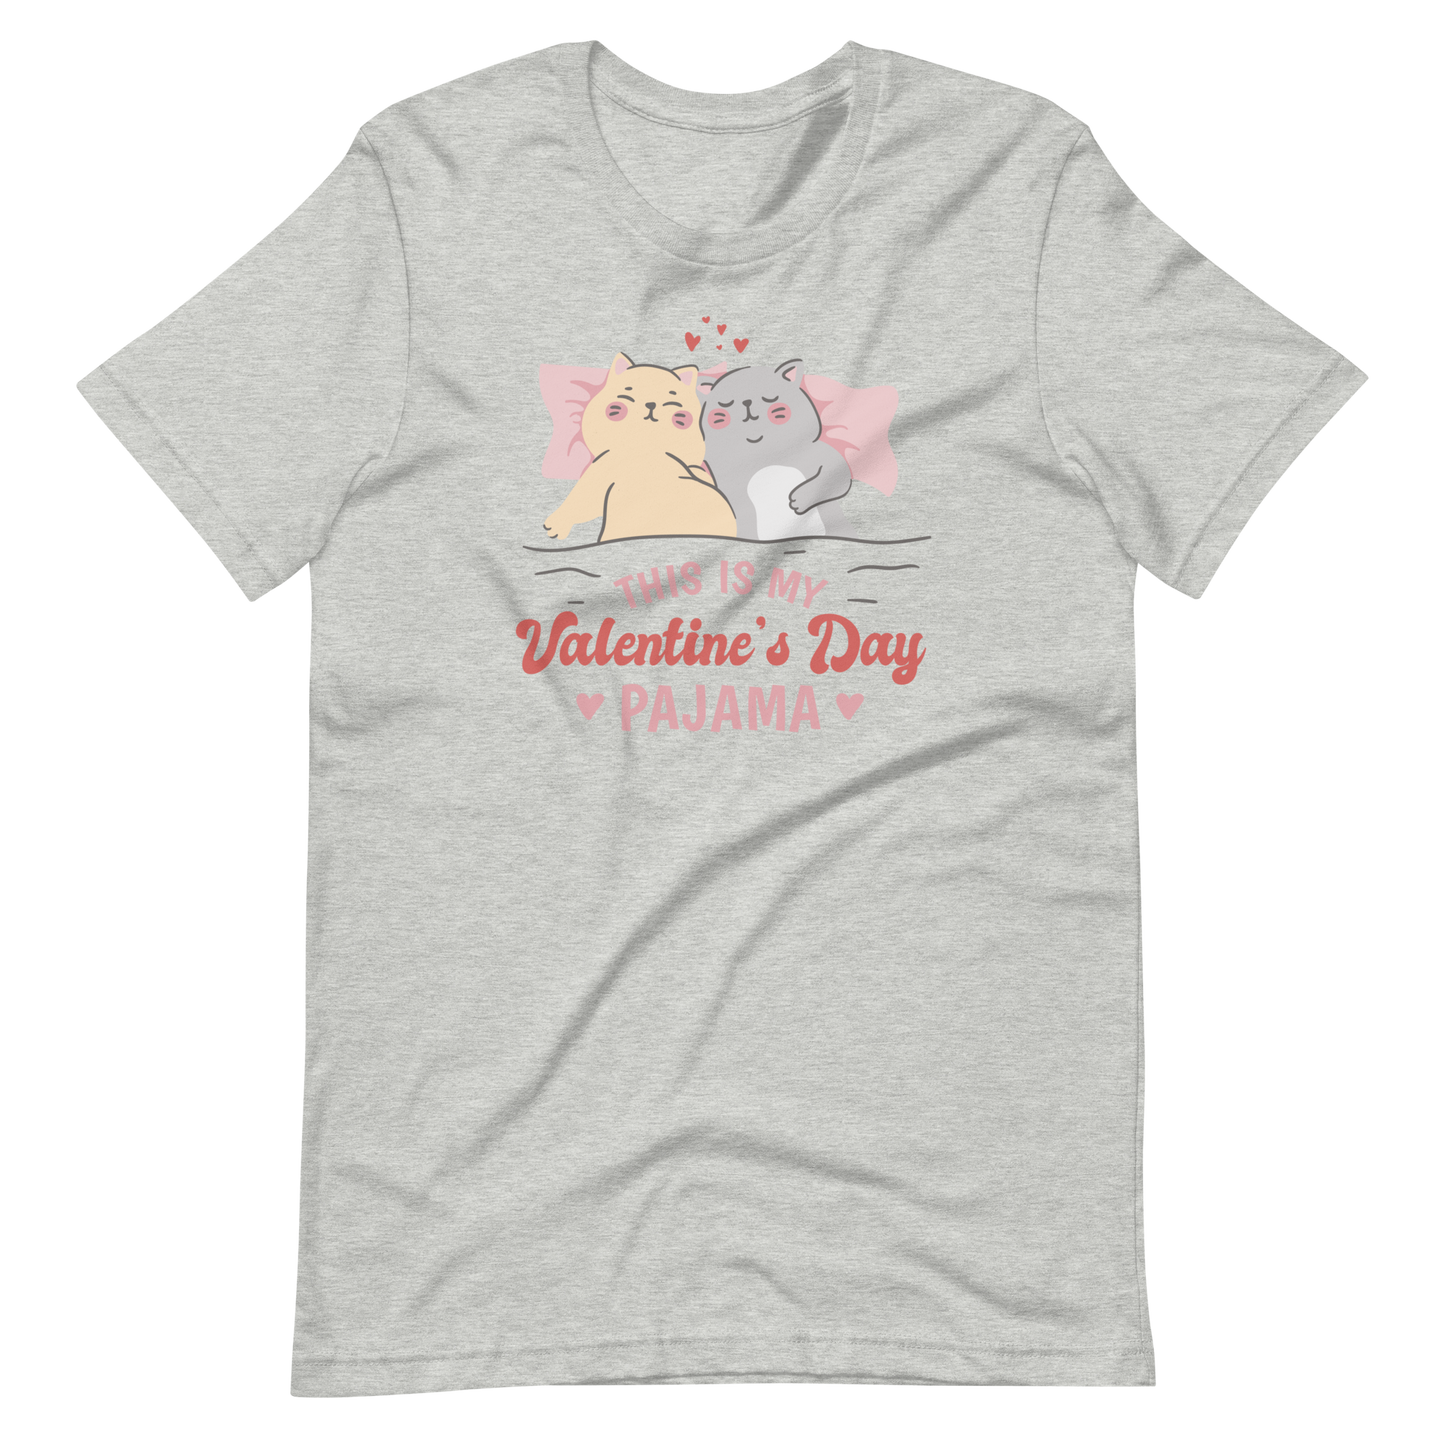 Cute cats sleeping on bed | Unisex t-shirt